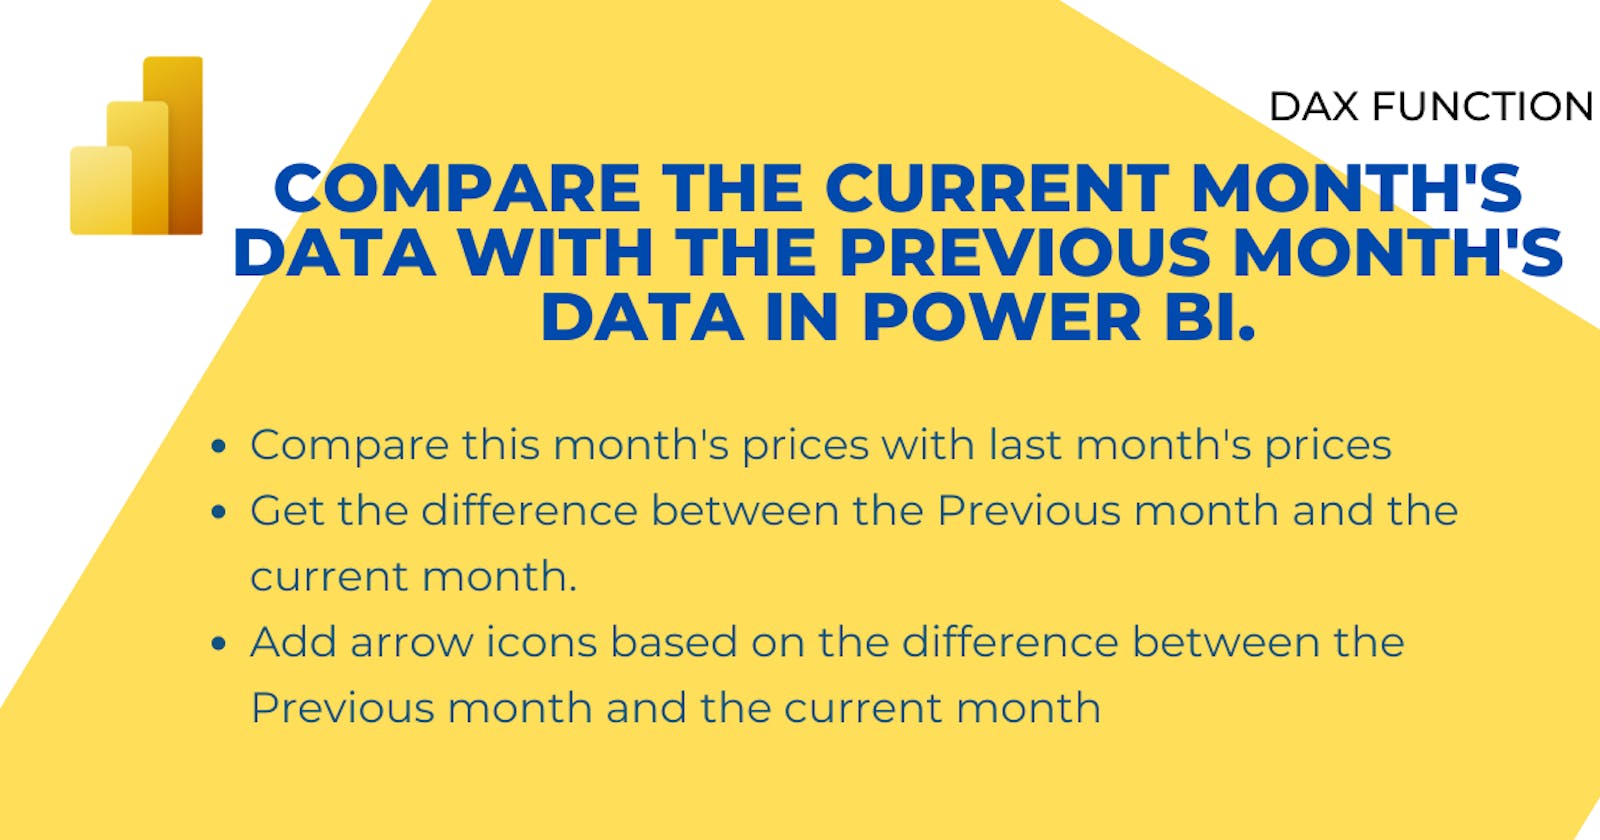 Compare the current month's data with the previous month's data in Power BI.